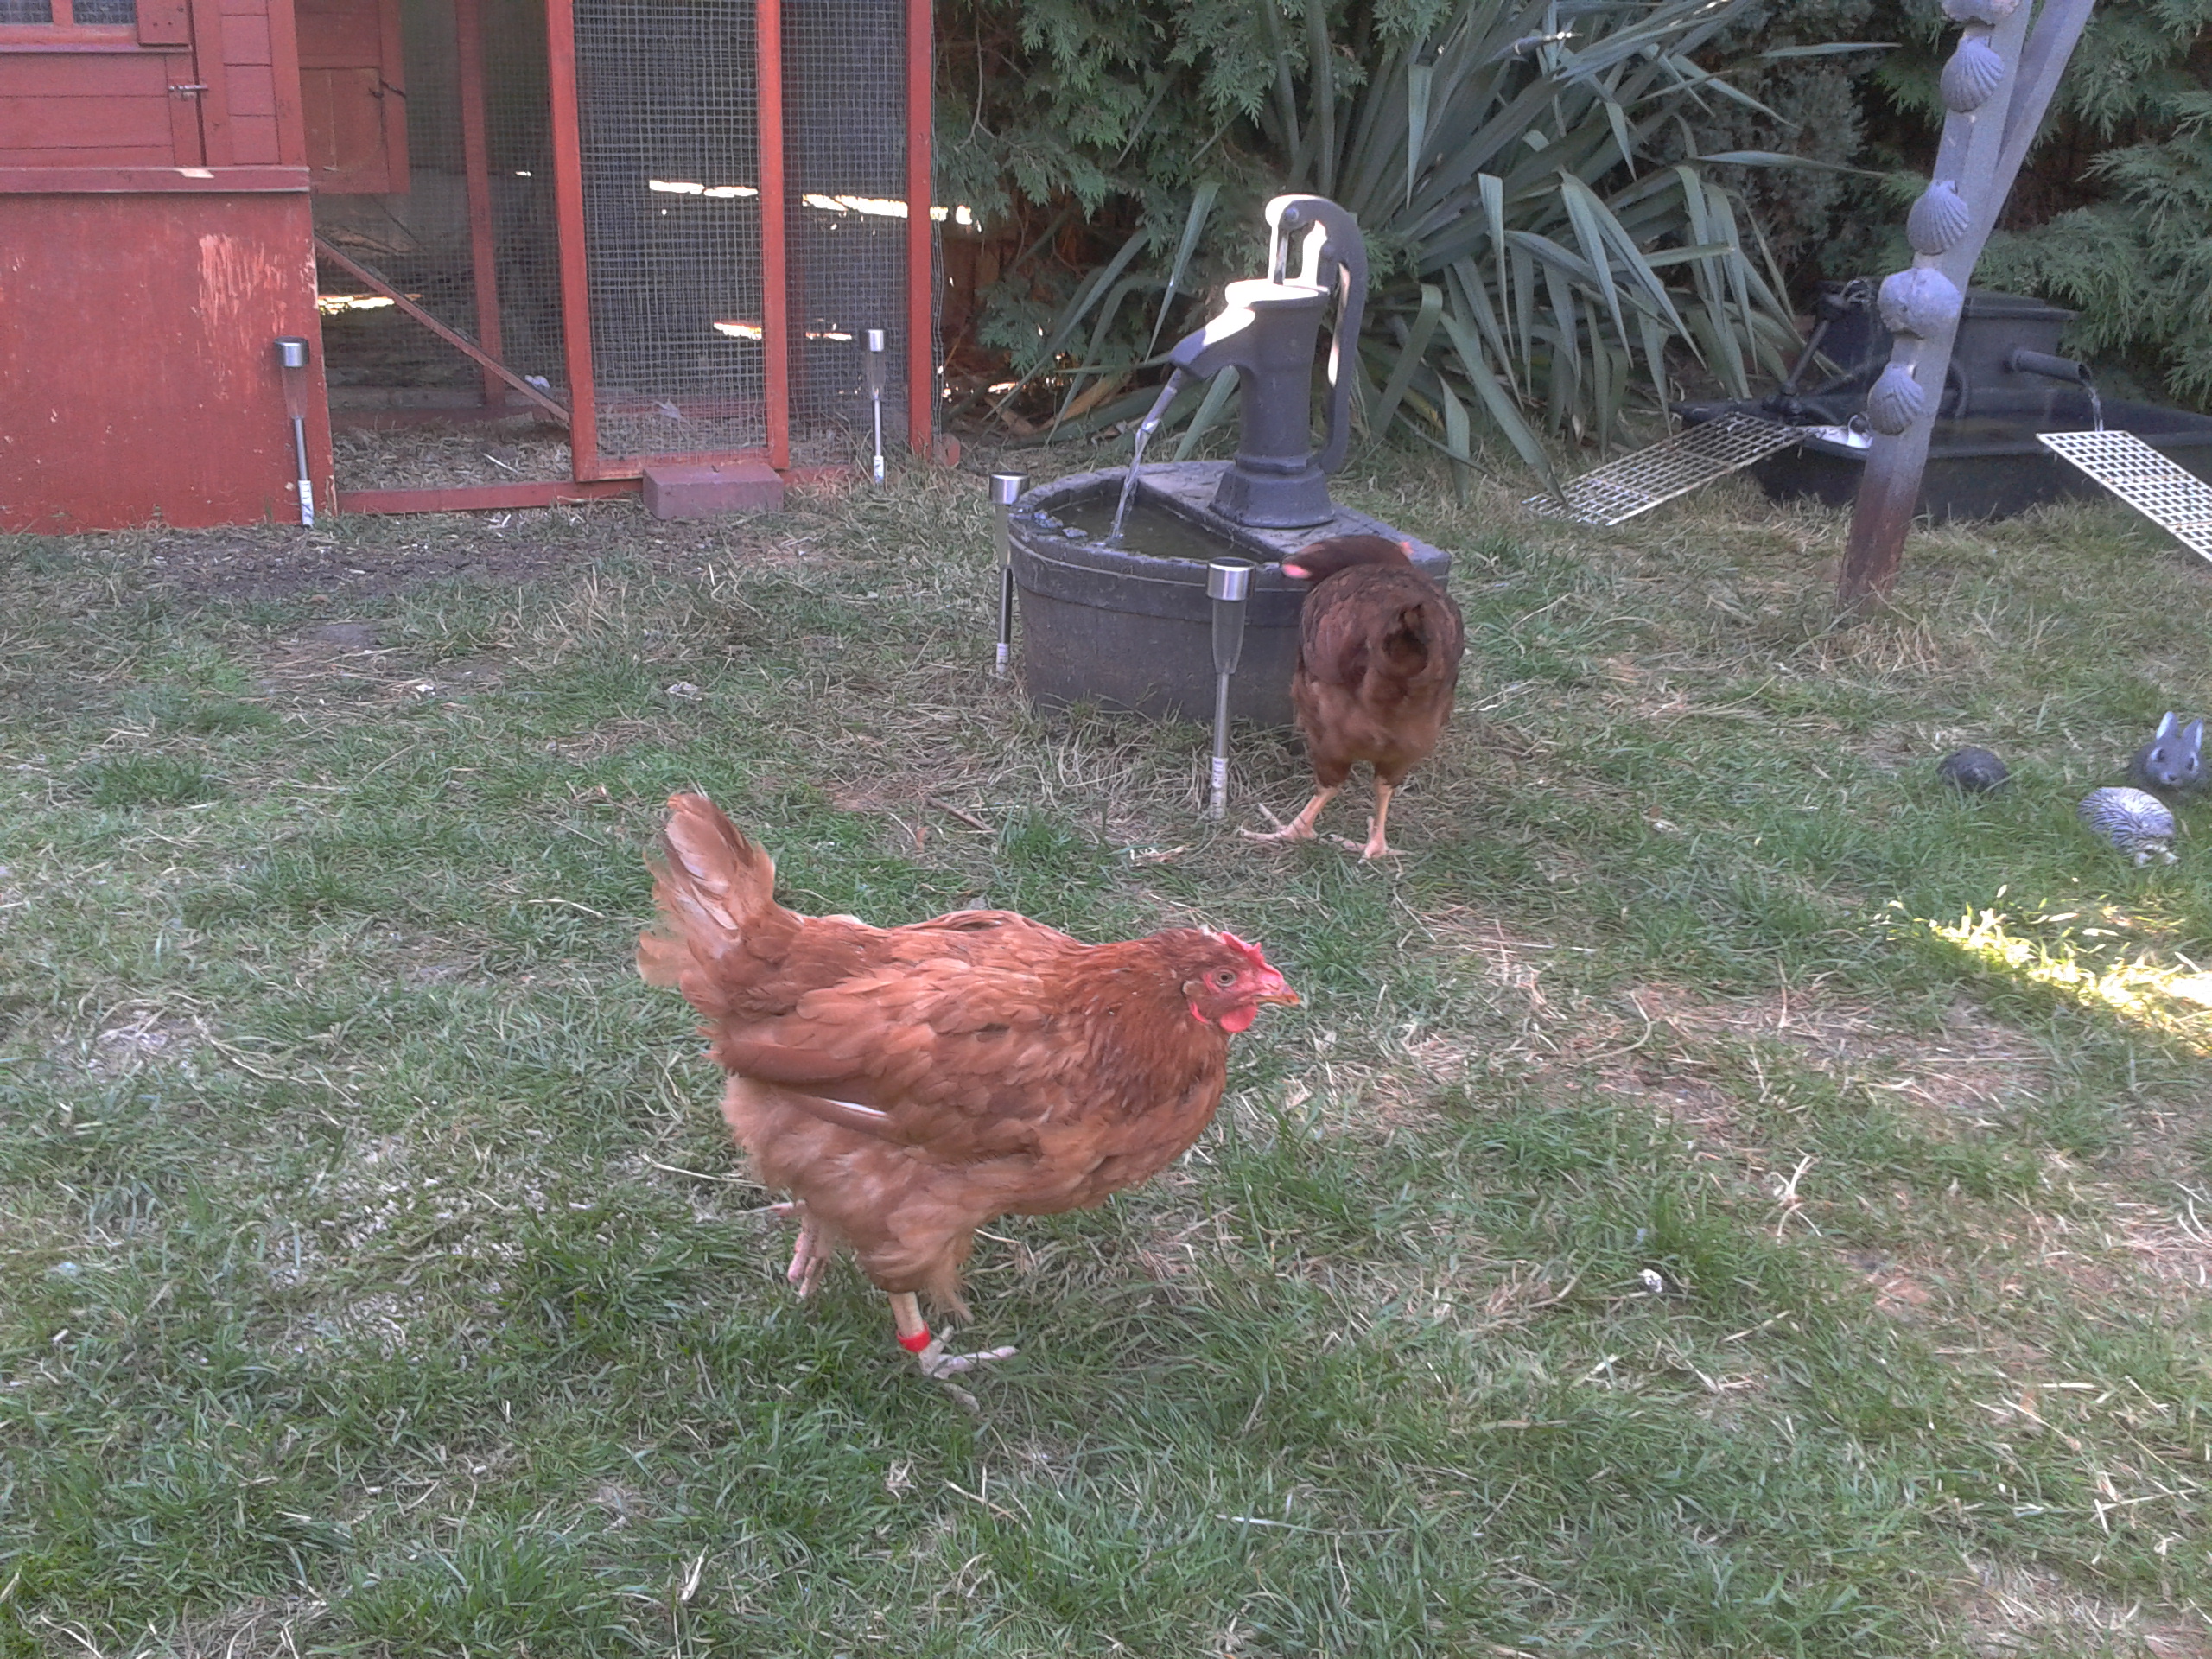 SOME OF MY POULTRY